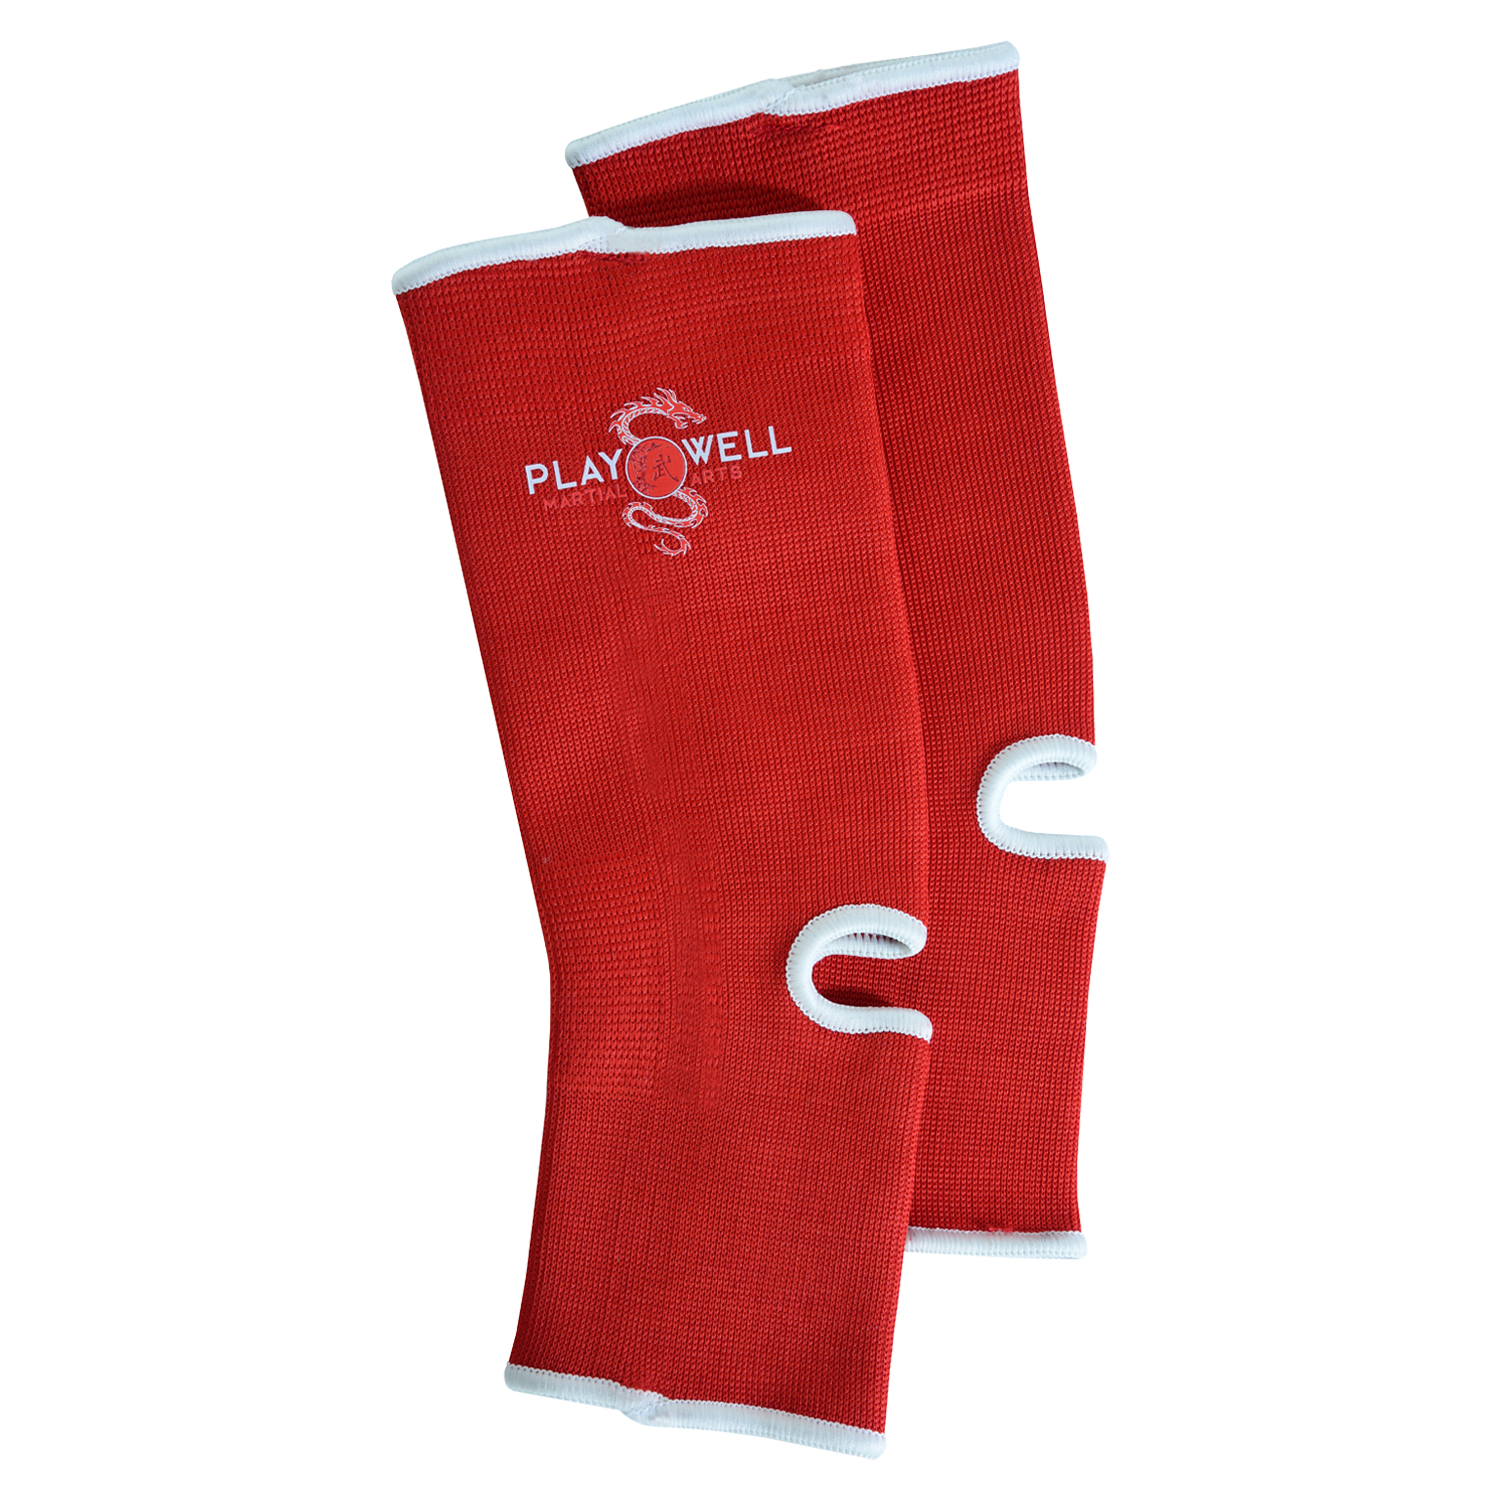 Playwell Muay Thai Elasticated Ankle Support - Red - Click Image to Close